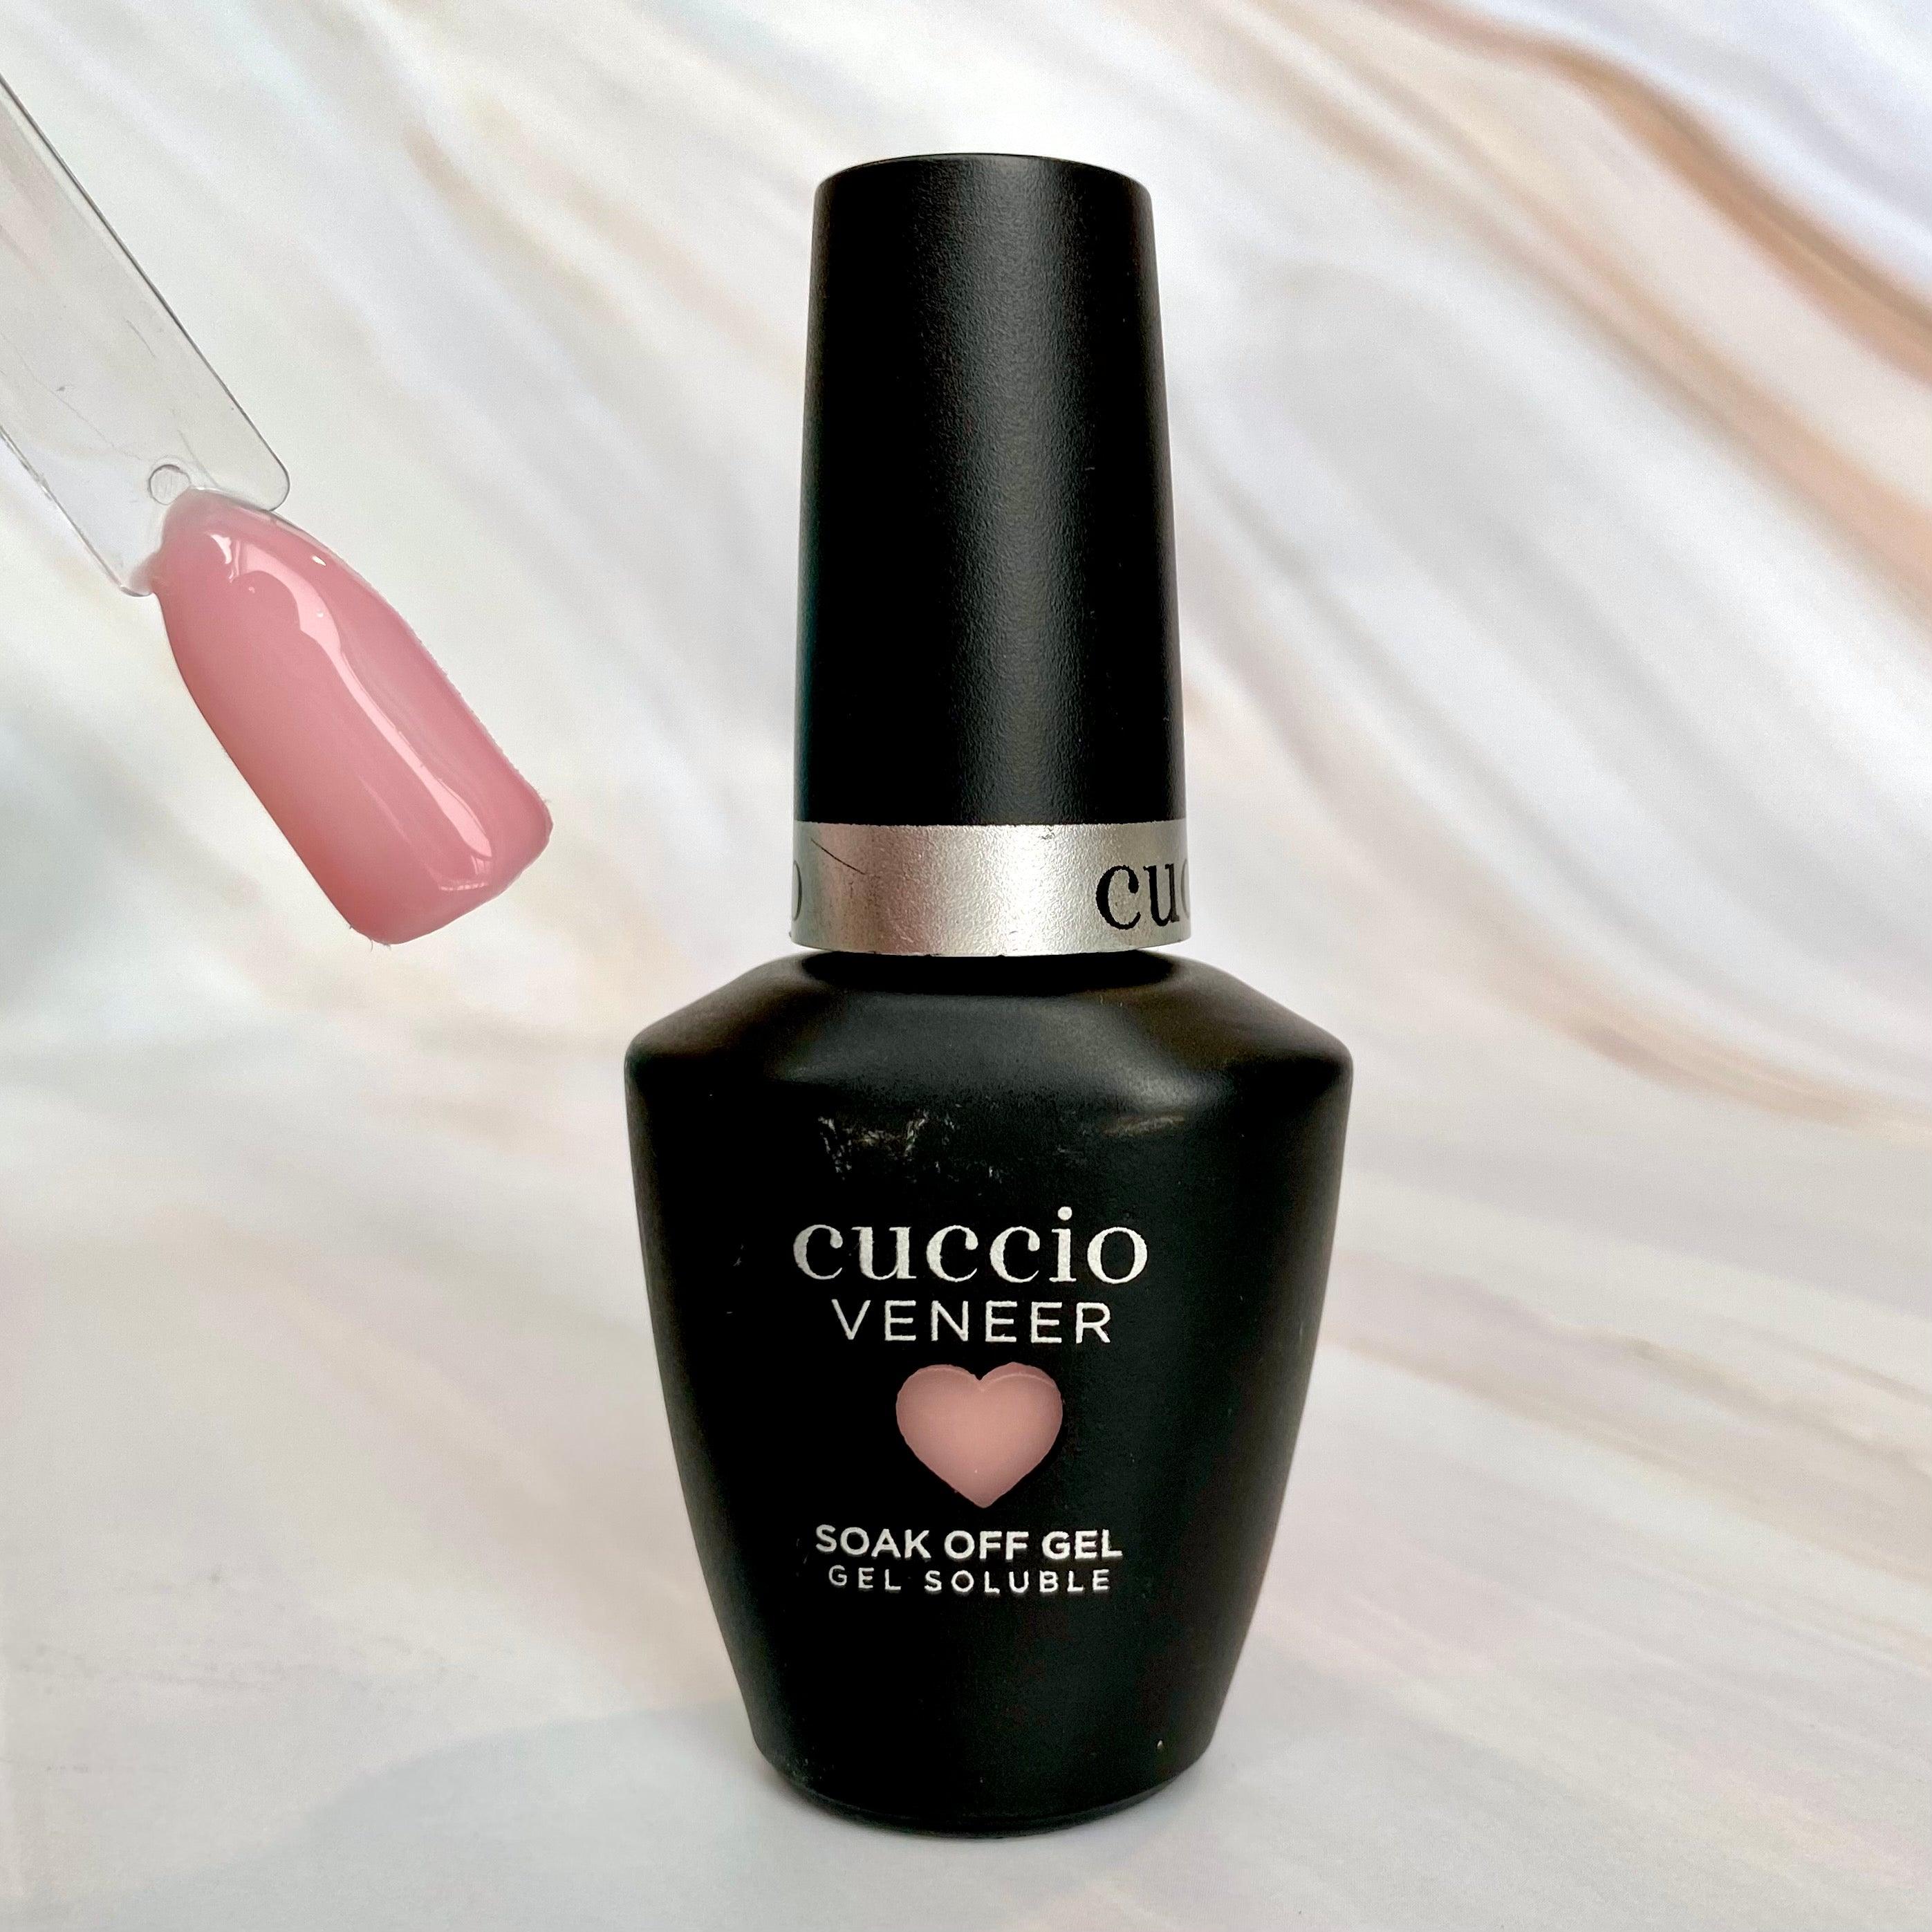 Vernis gel à ongles CUCCIO - All Products - L'abc du maquillage